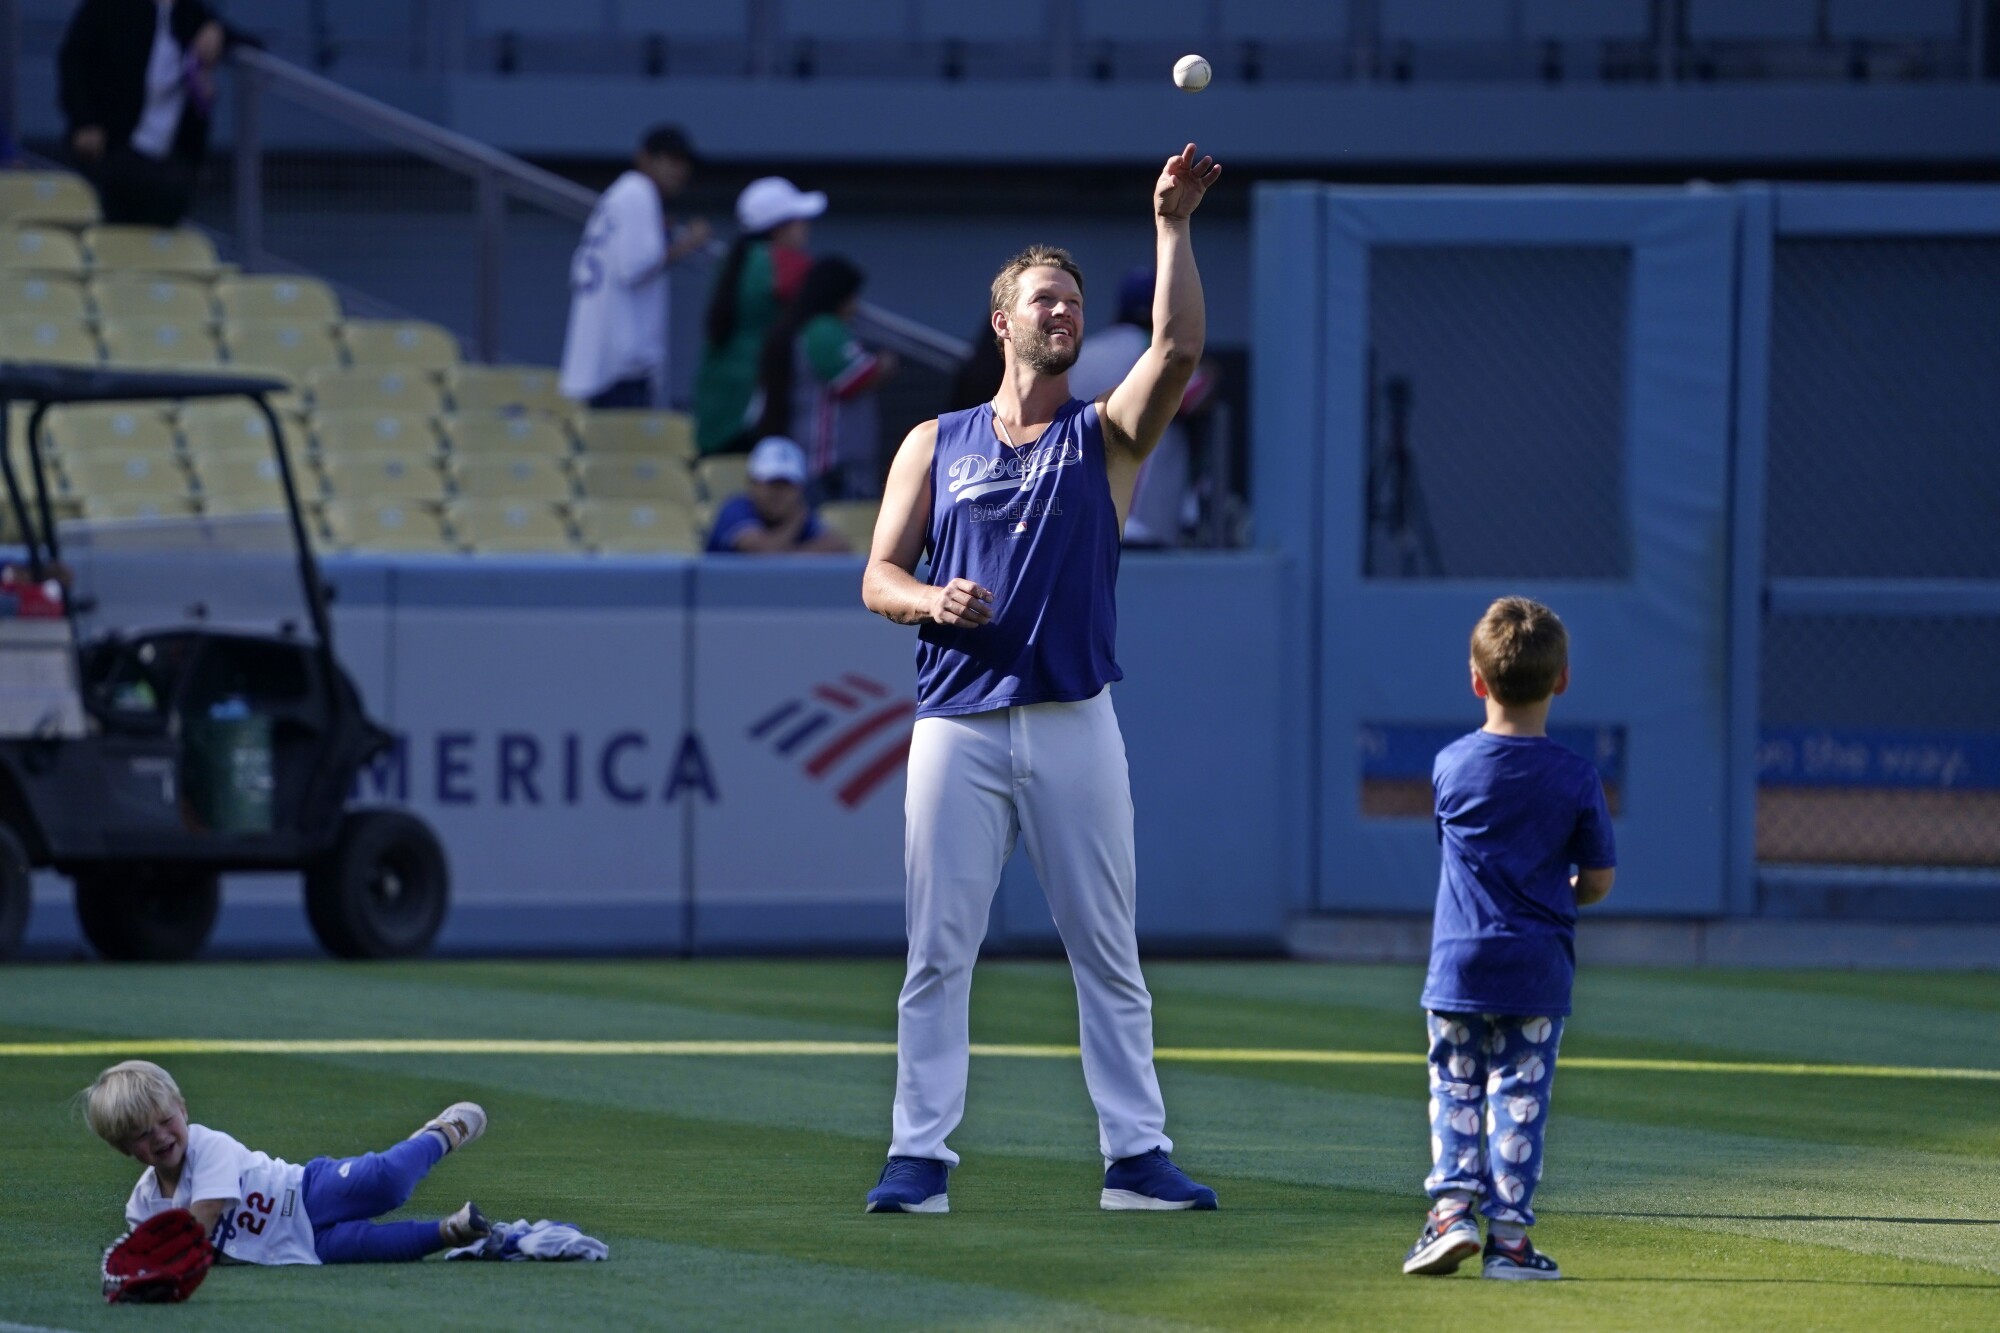 Clayton Kershaw plays catch with his son Charley, right, while his other son Cooper rolls around on the grass.